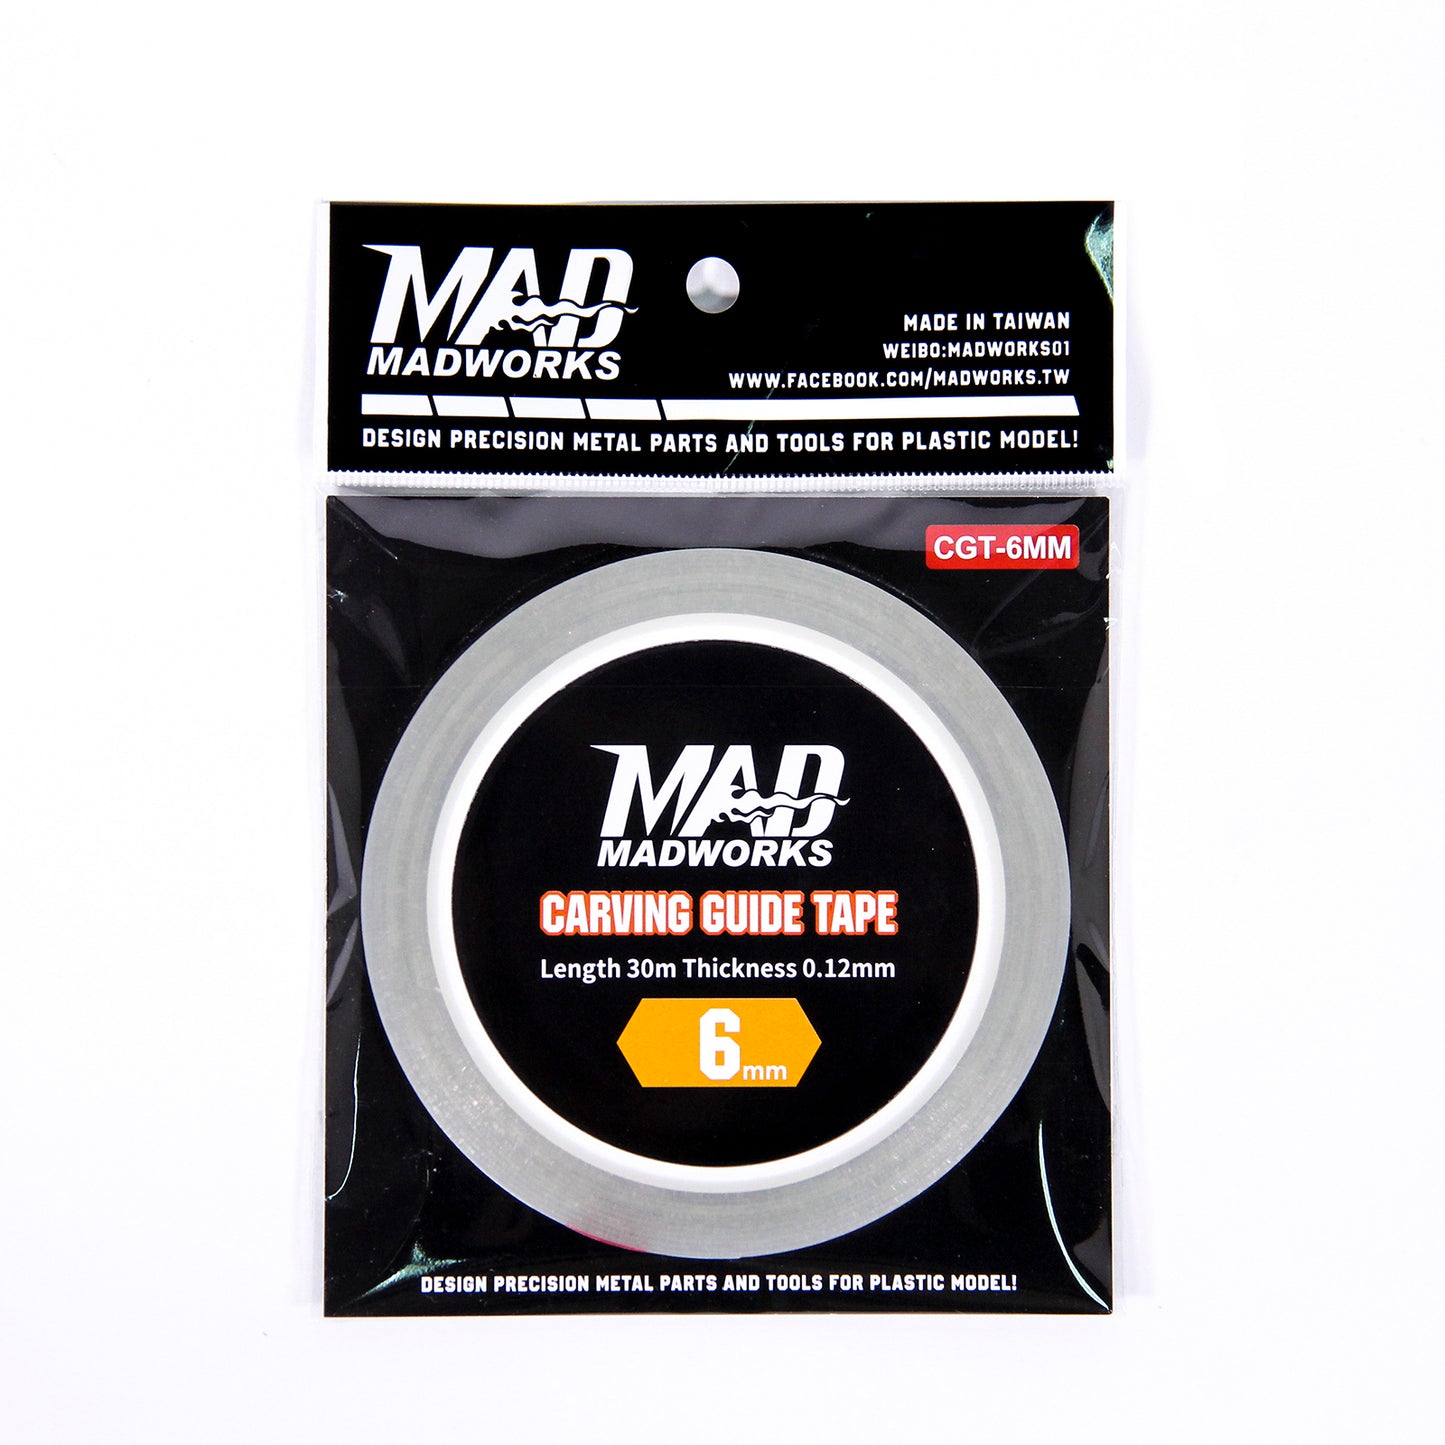 Madworks Carving Guide Tape 30m